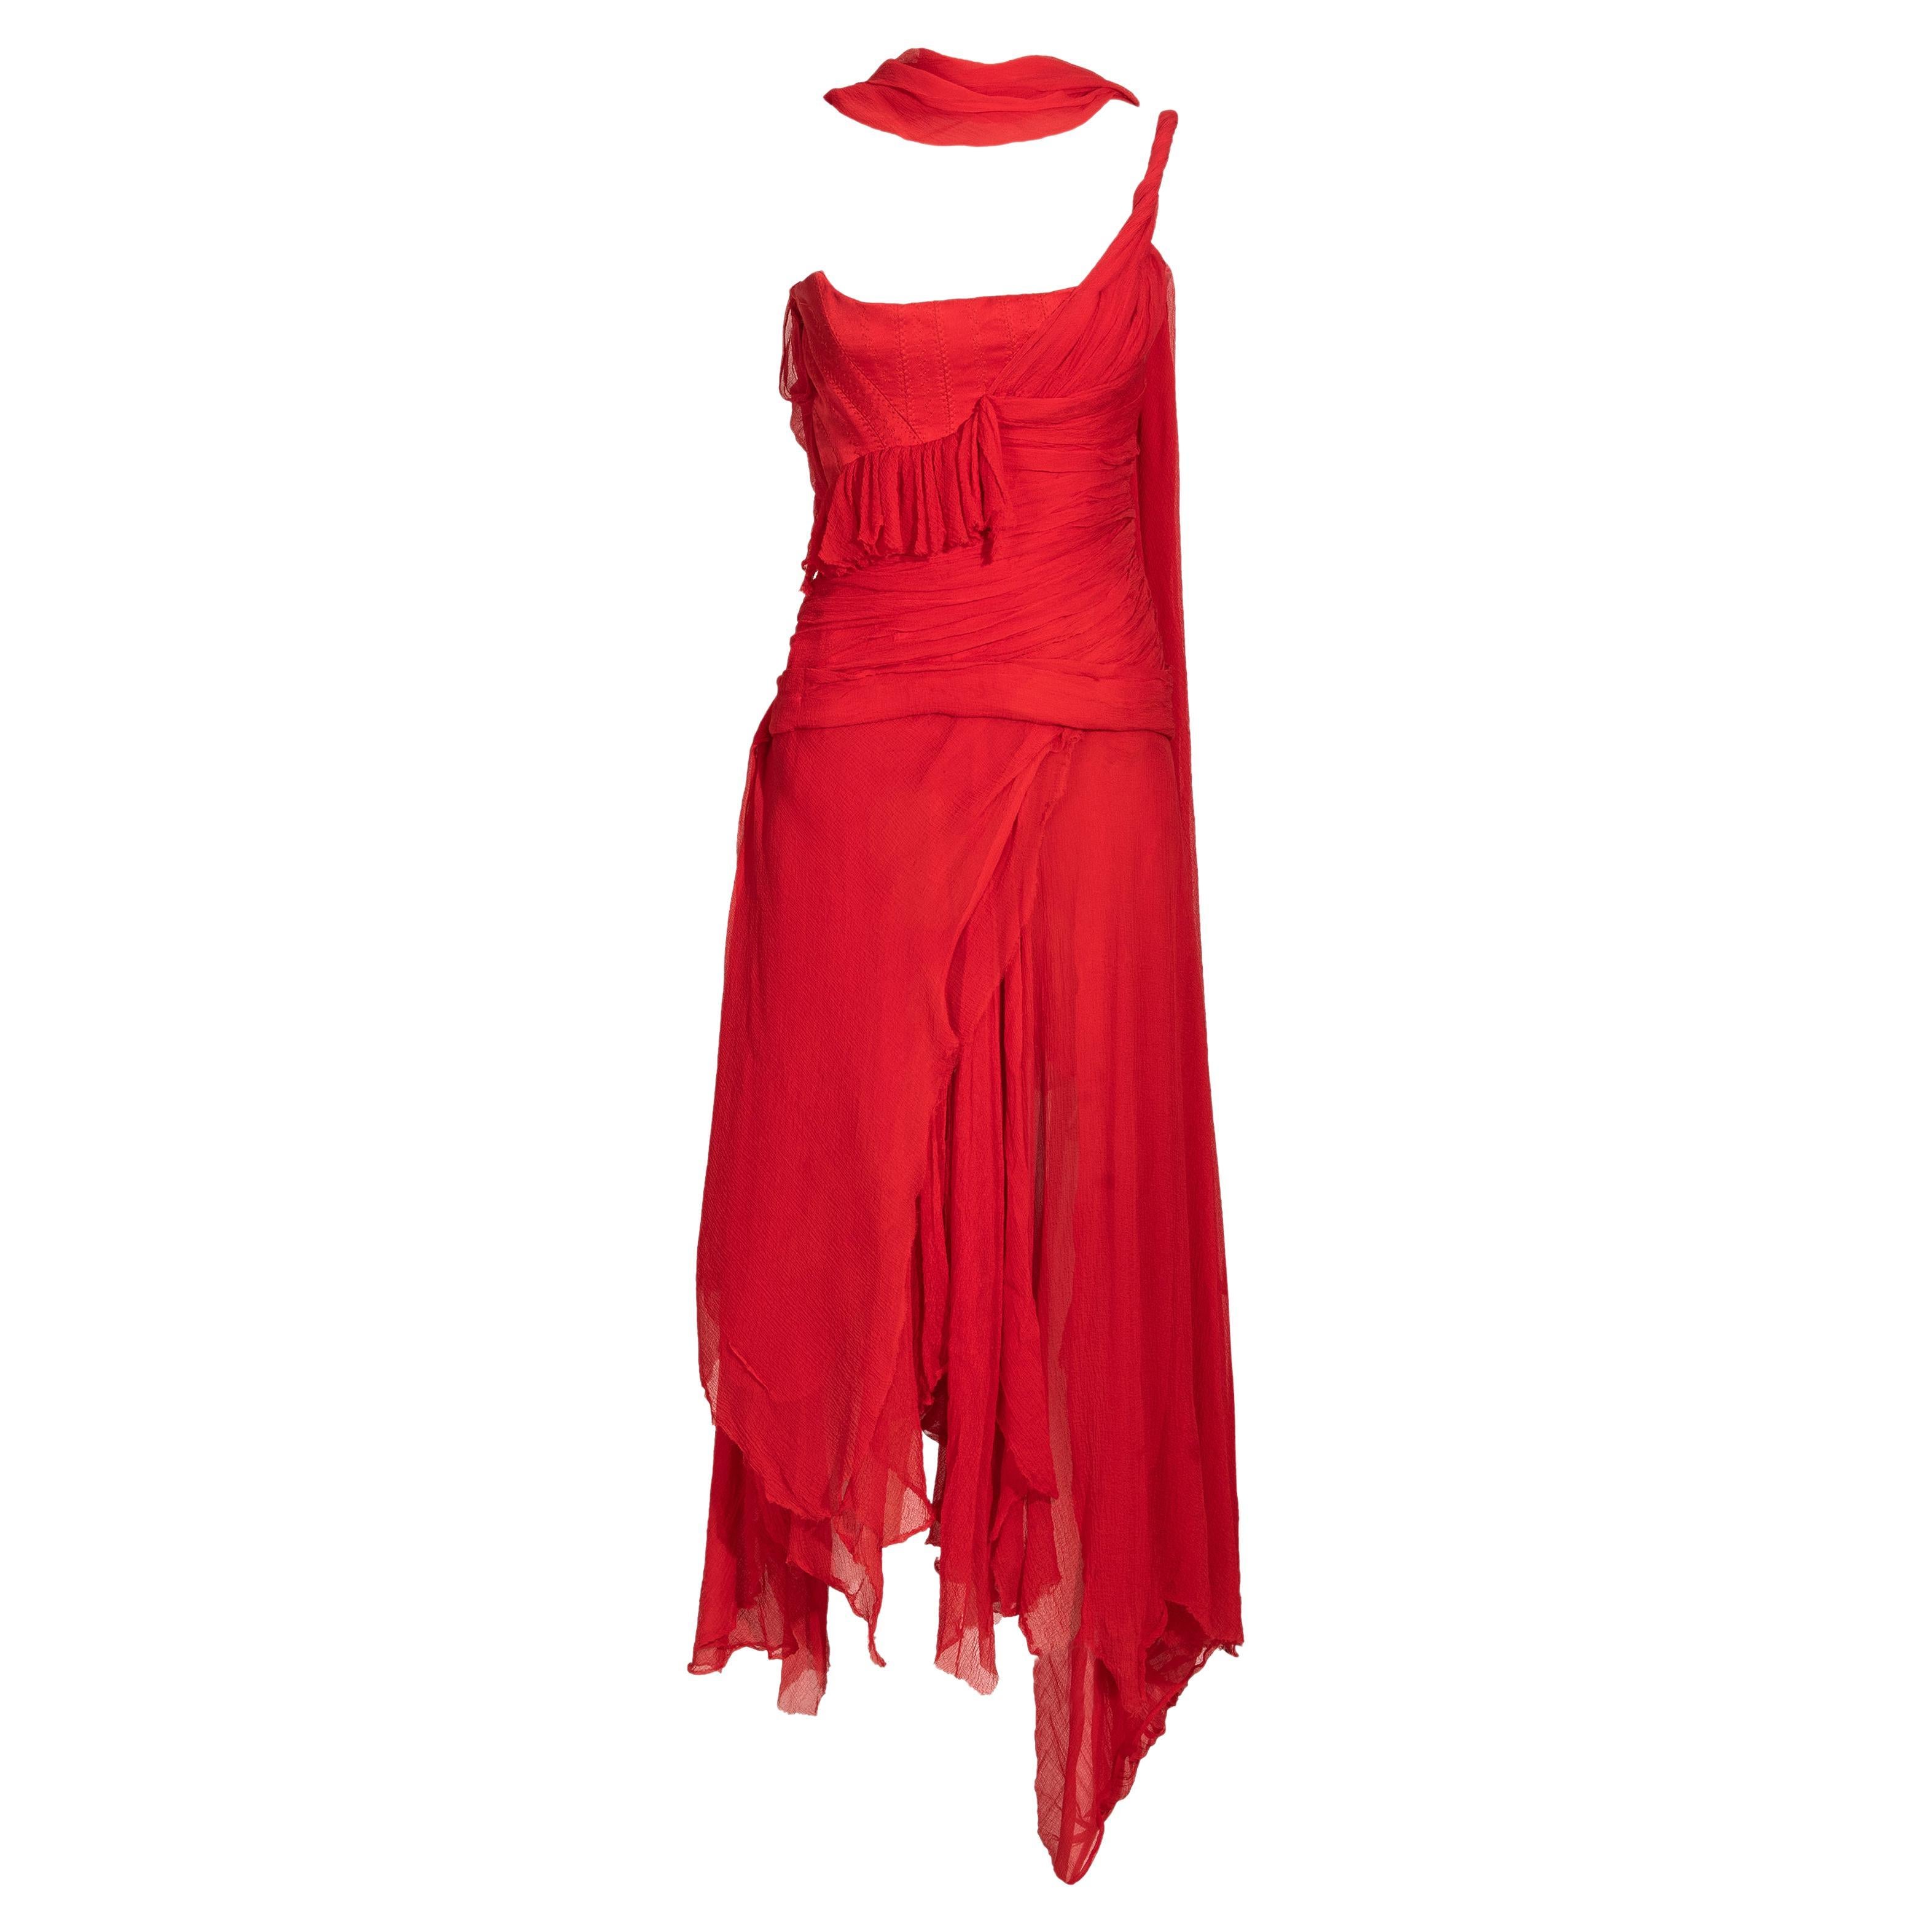 S/S 2003 Alexander McQueen  'Irere' Collection Red Silk Chiffon Gown with Sash